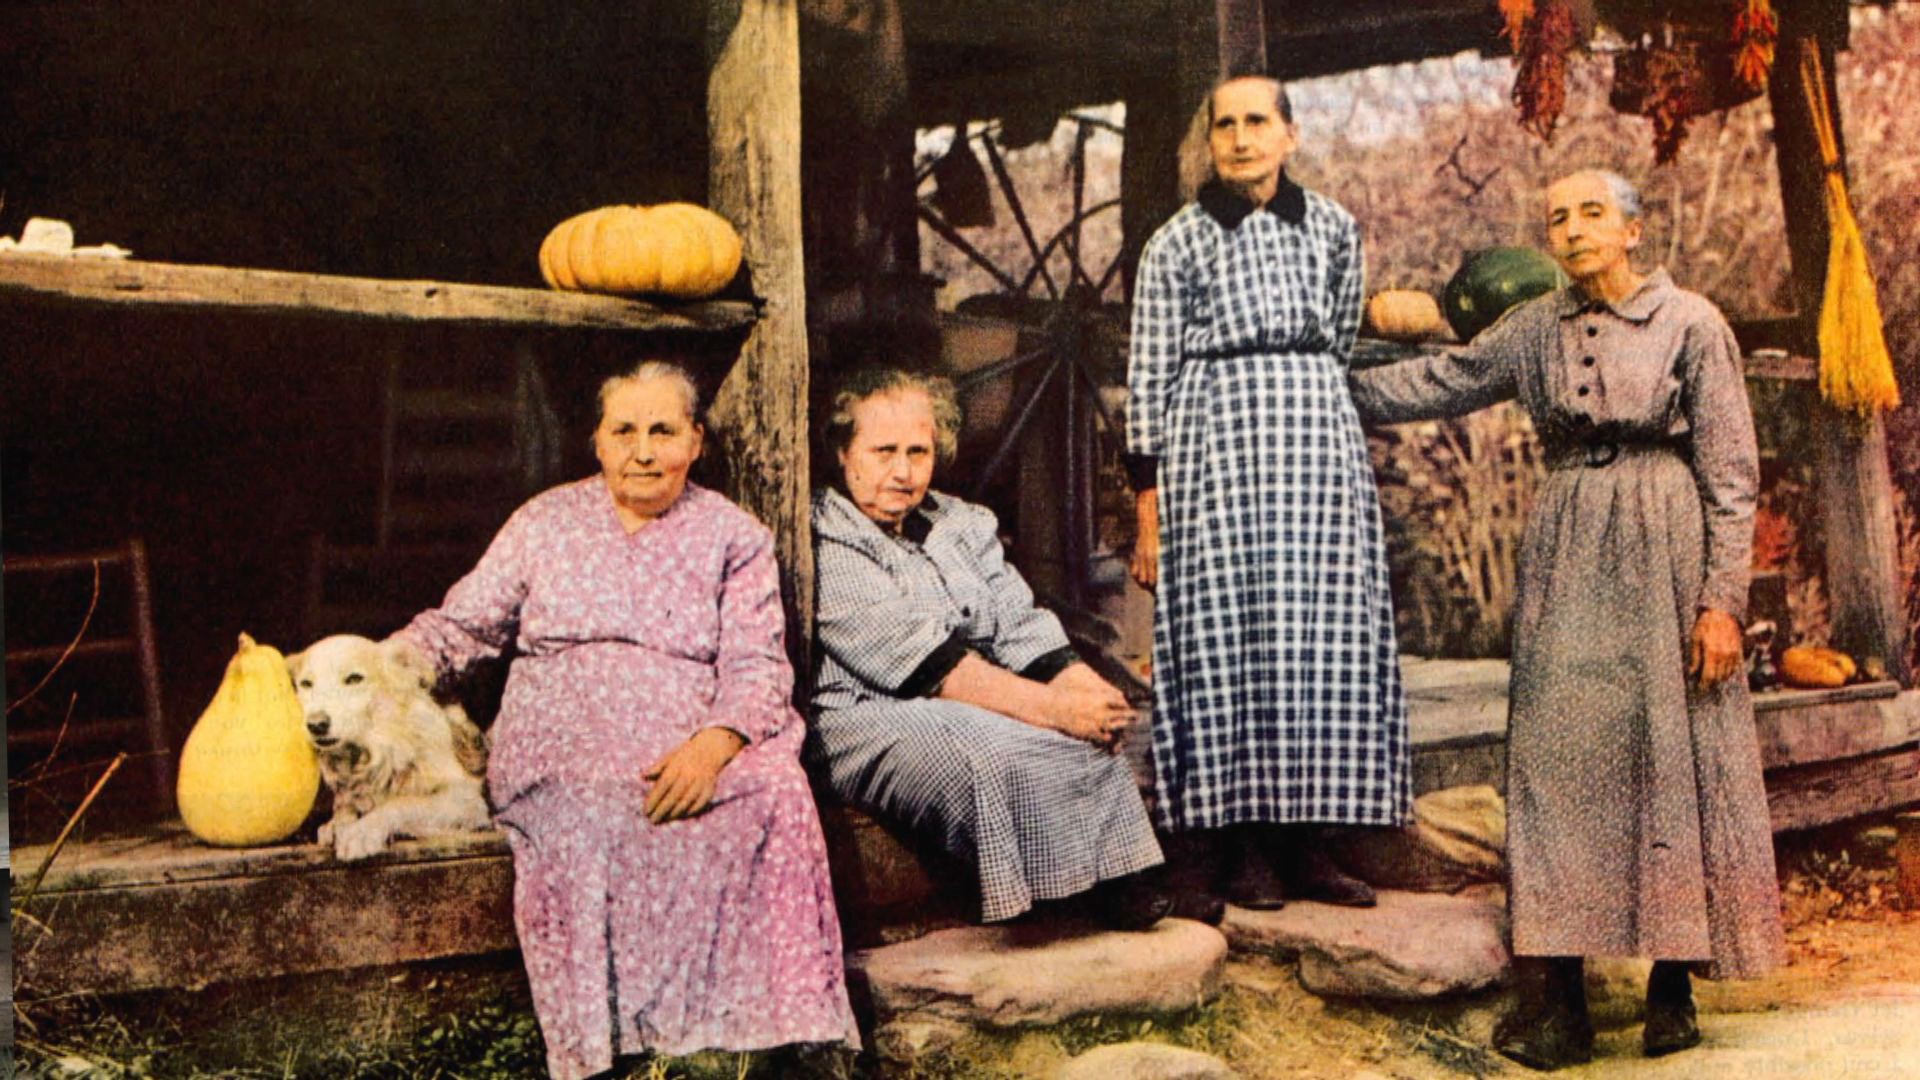 The story of the Walker Sisters who continued living in the Great Smoky Mountains after it became a national park still fascinates visitors.